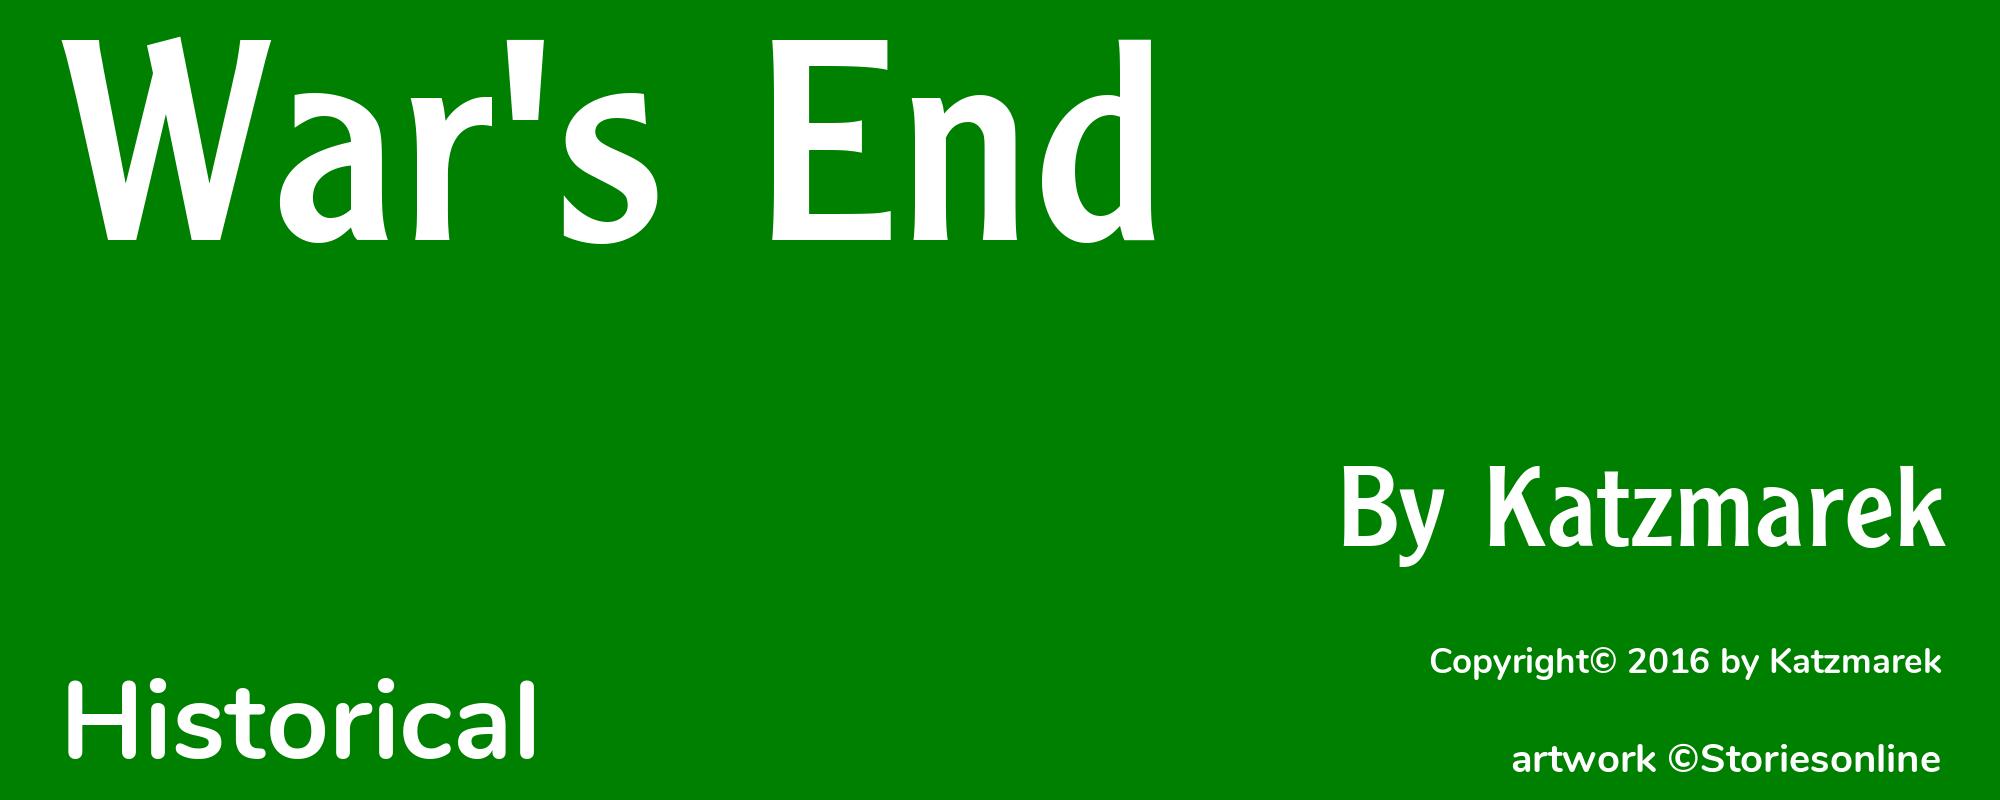 War's End - Cover